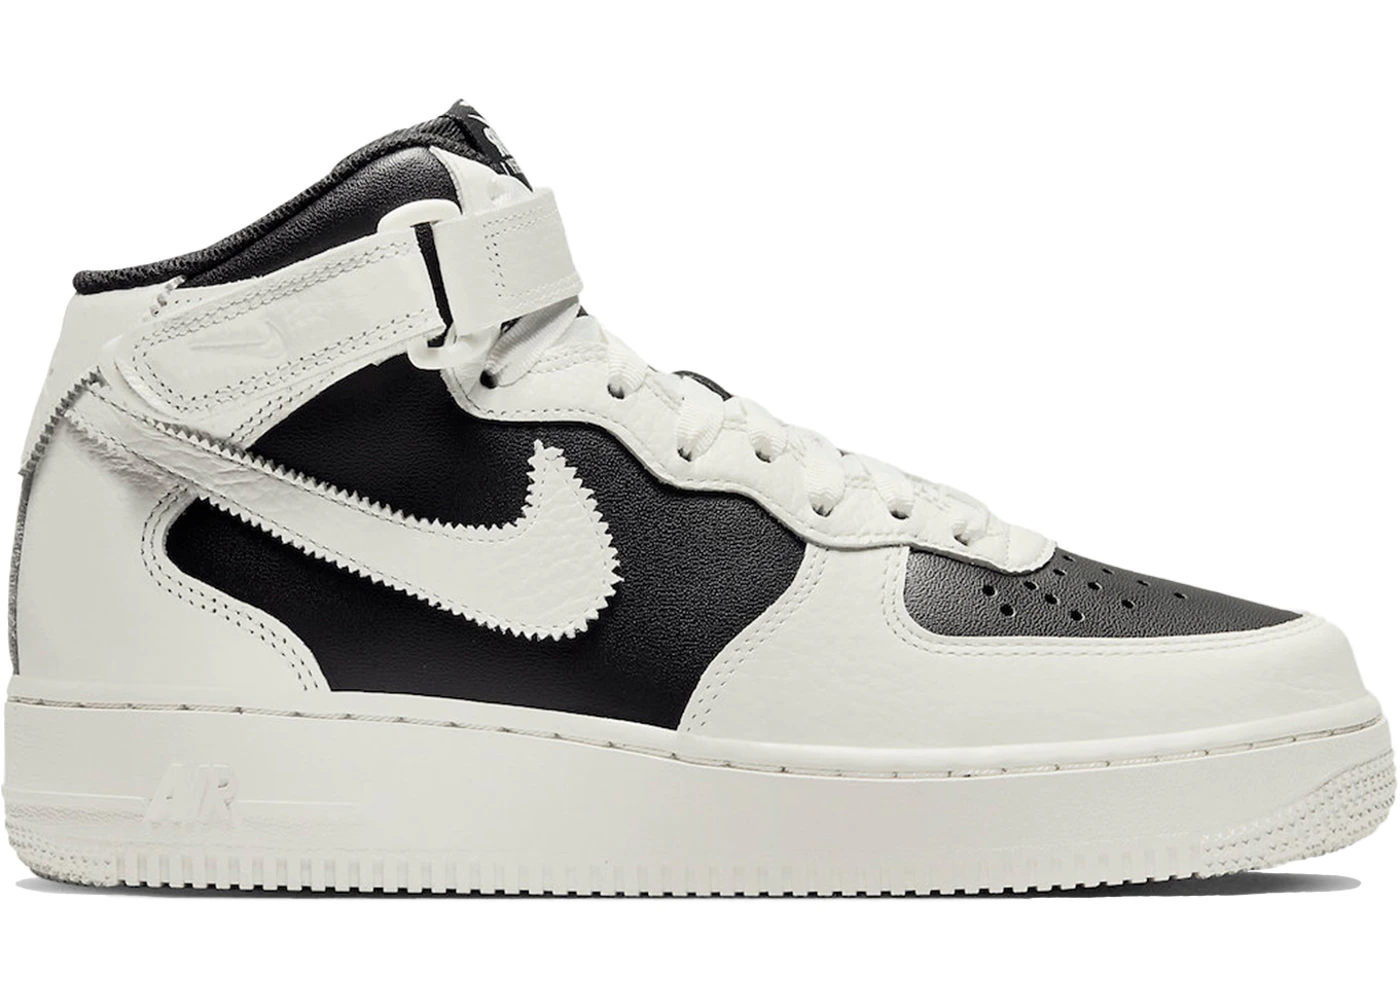 Now Available: Nike Air Force 1 Mid (W) 